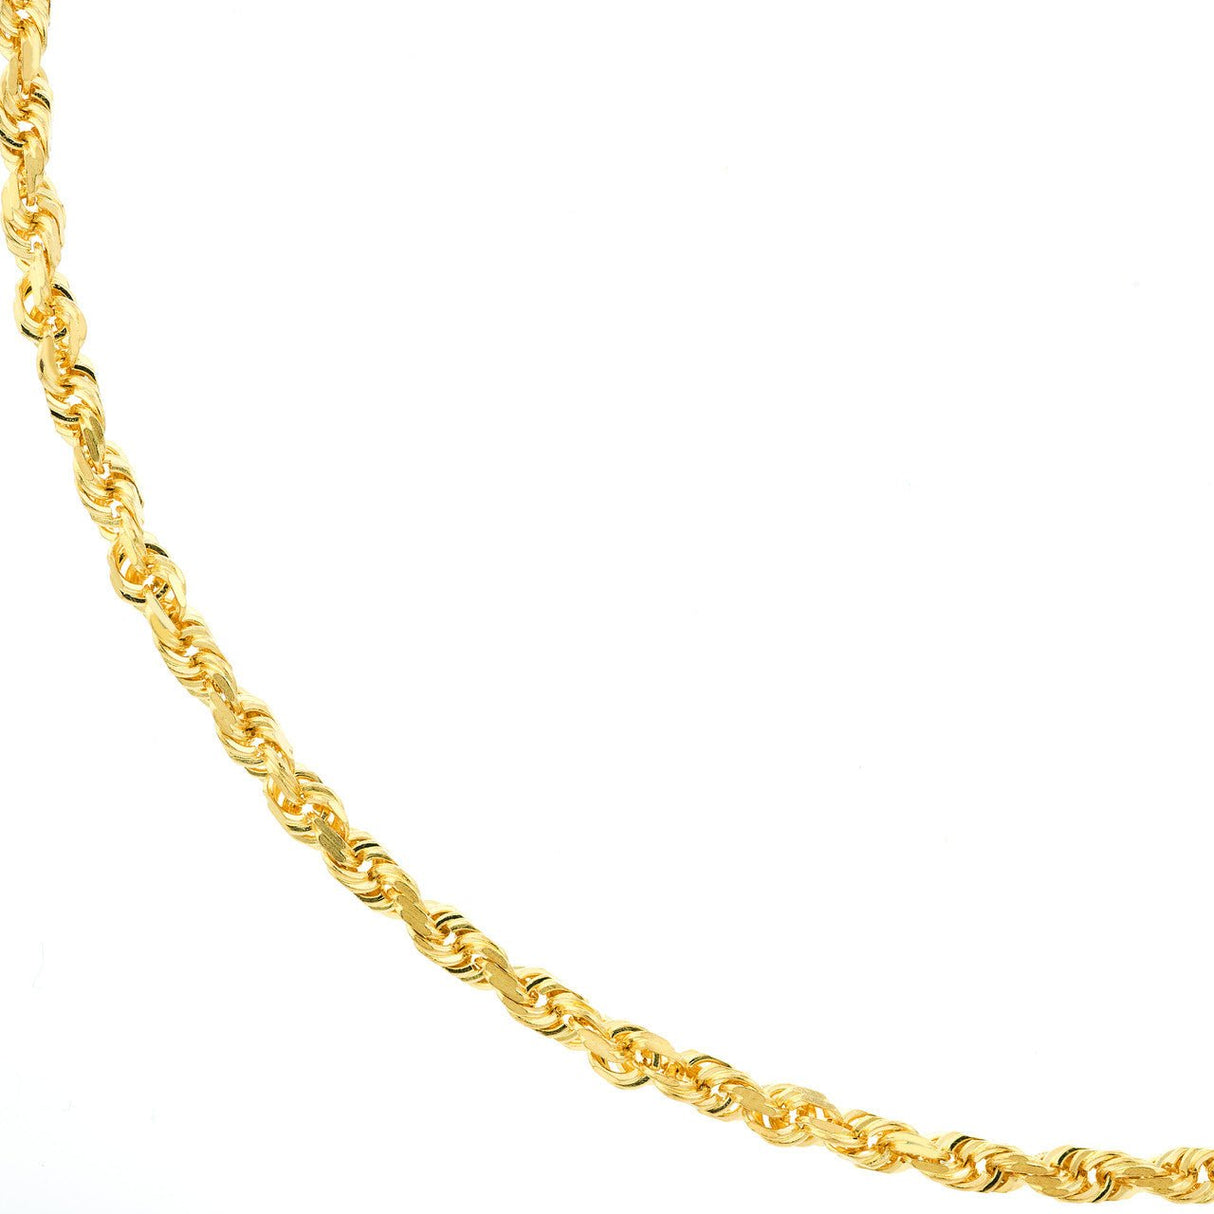 Full length shot of the radiant Gold Chain, showcasing the warm glow and intricate craftsmanship, compare us with  zales, compere us with oradina, clean origin of gold, diamond  origin, gold necklaces, gold rope chain,